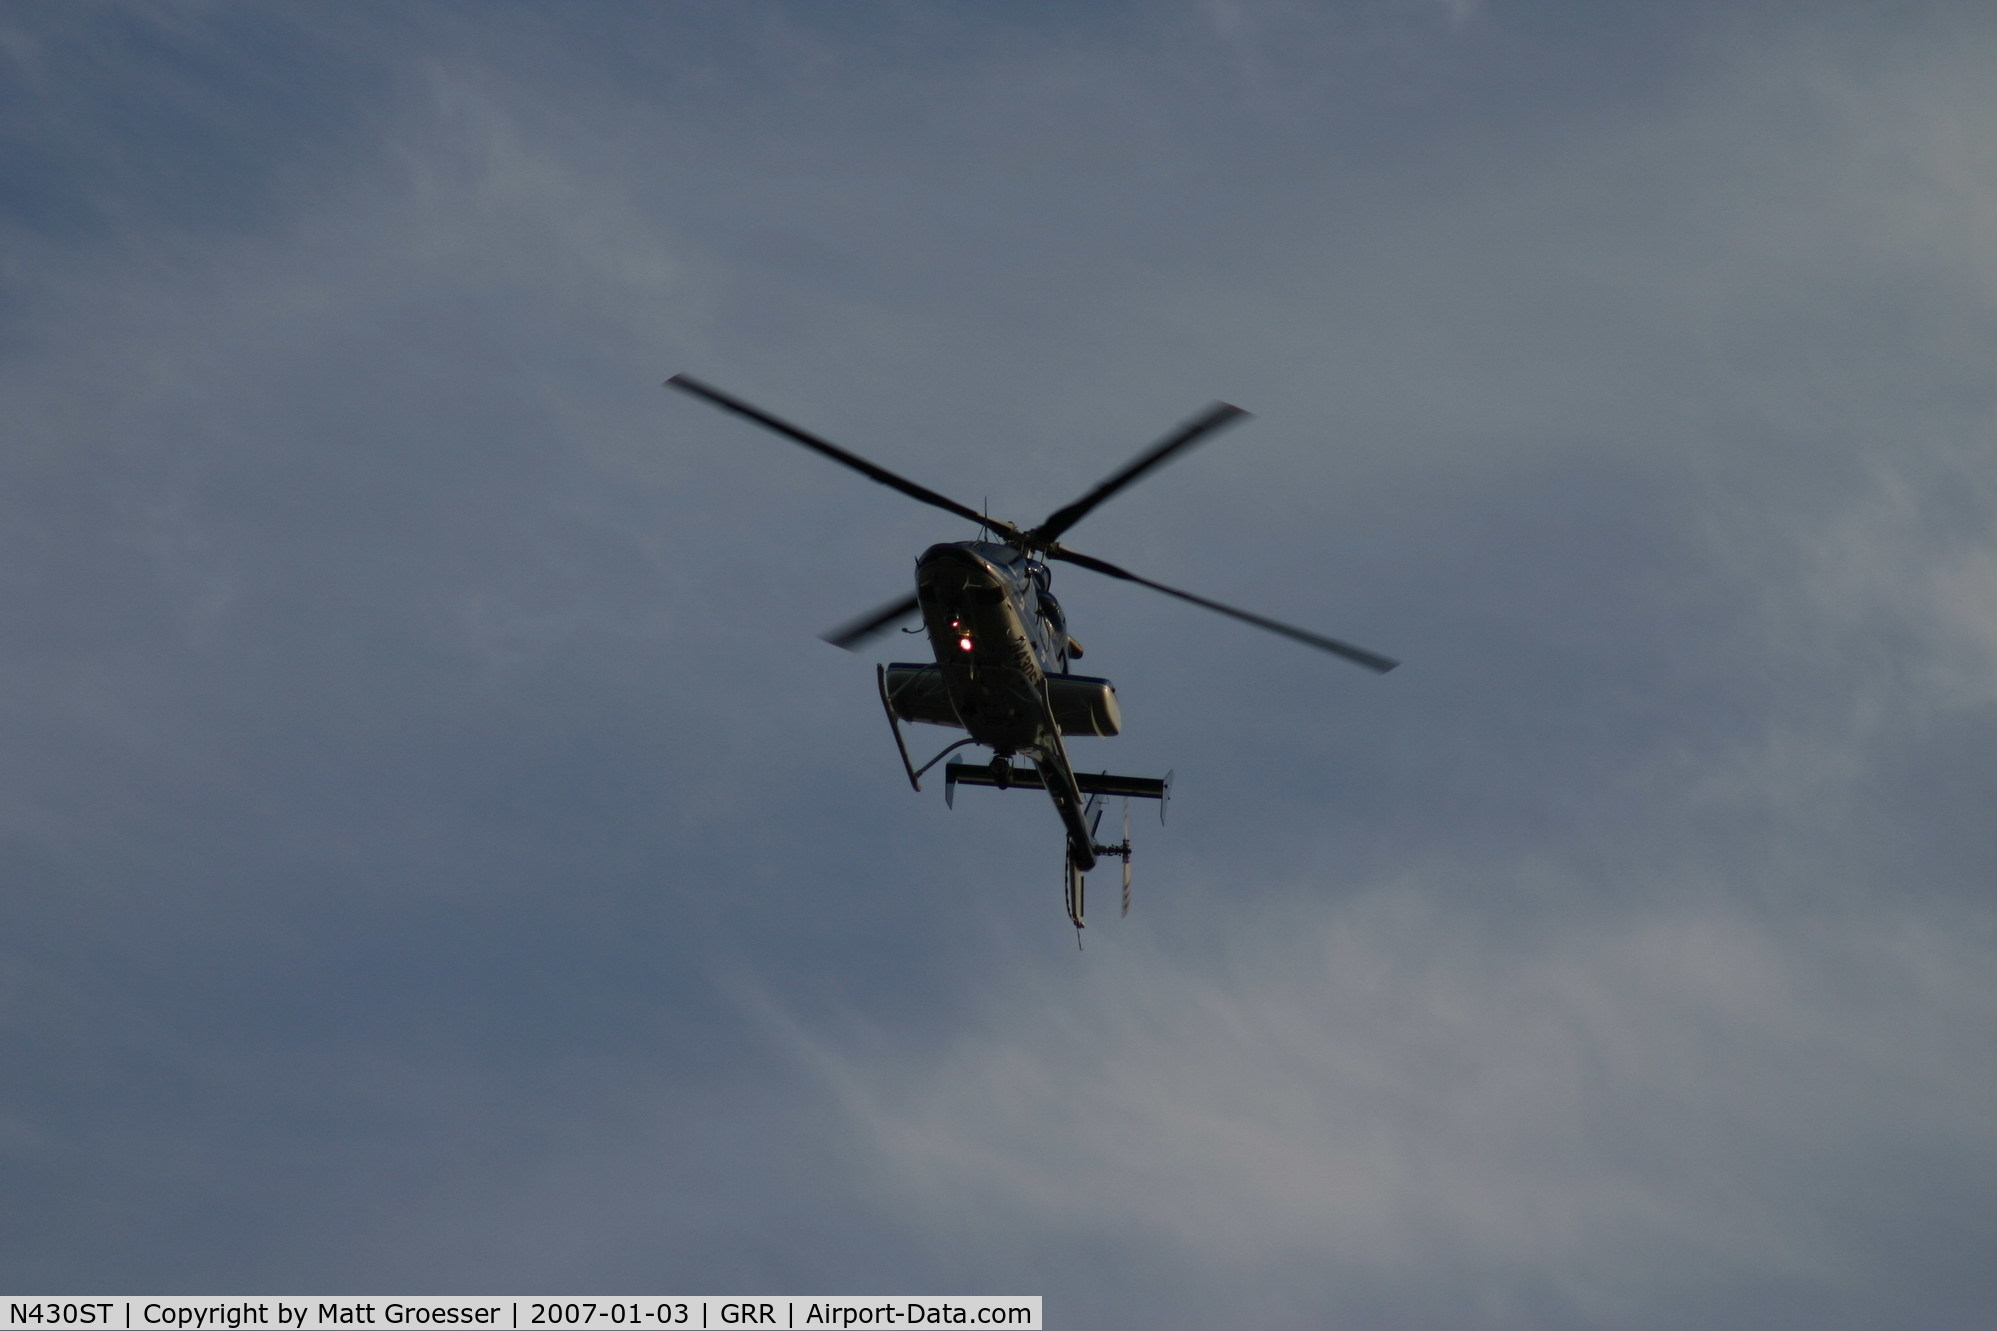 N430ST, 2000 Bell 430 C/N 49071, MSP helicopter over Grand Rapids, MI for Gerald R. Ford funeral security detail